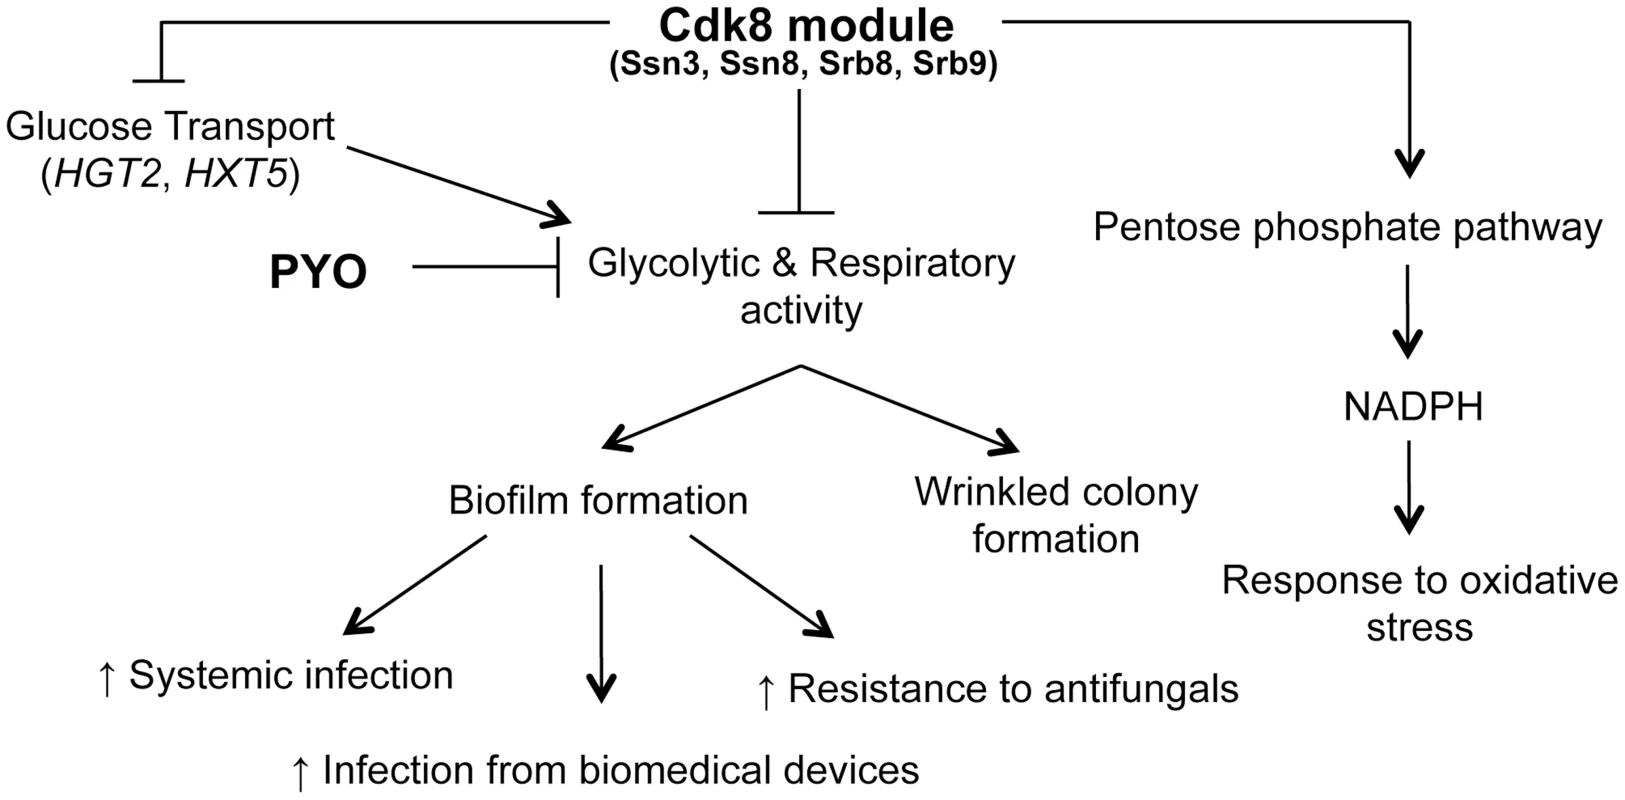 Phenotypes related to defects in the Cdk8 module can be multifactorial.